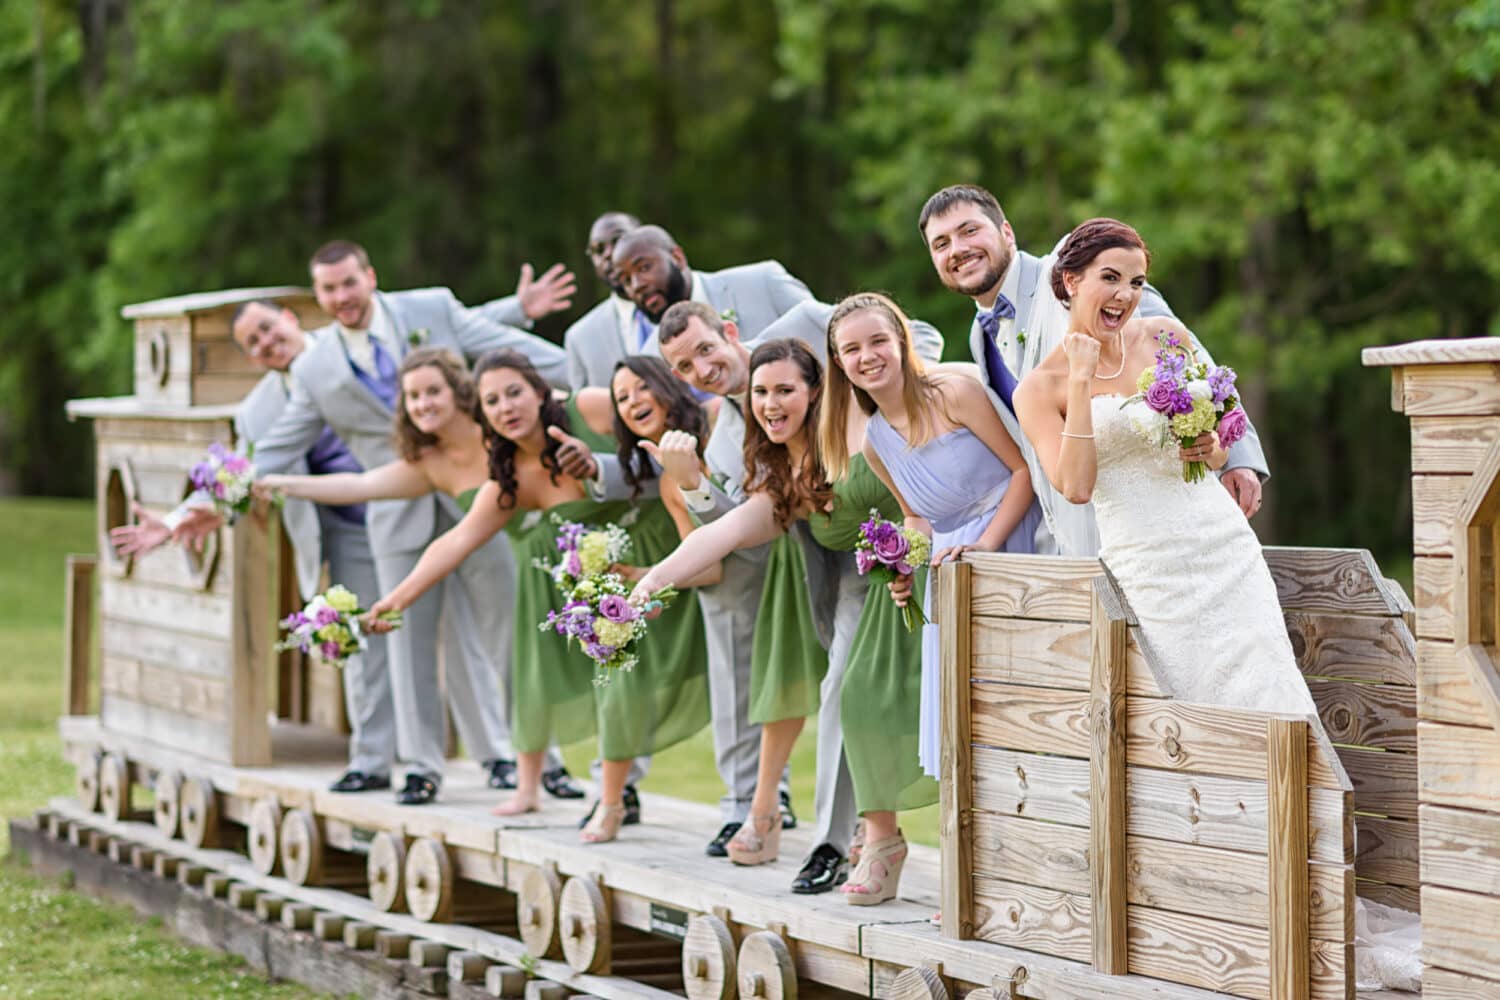 Bridal party having fun on the toy train - Upper Mill Plantation